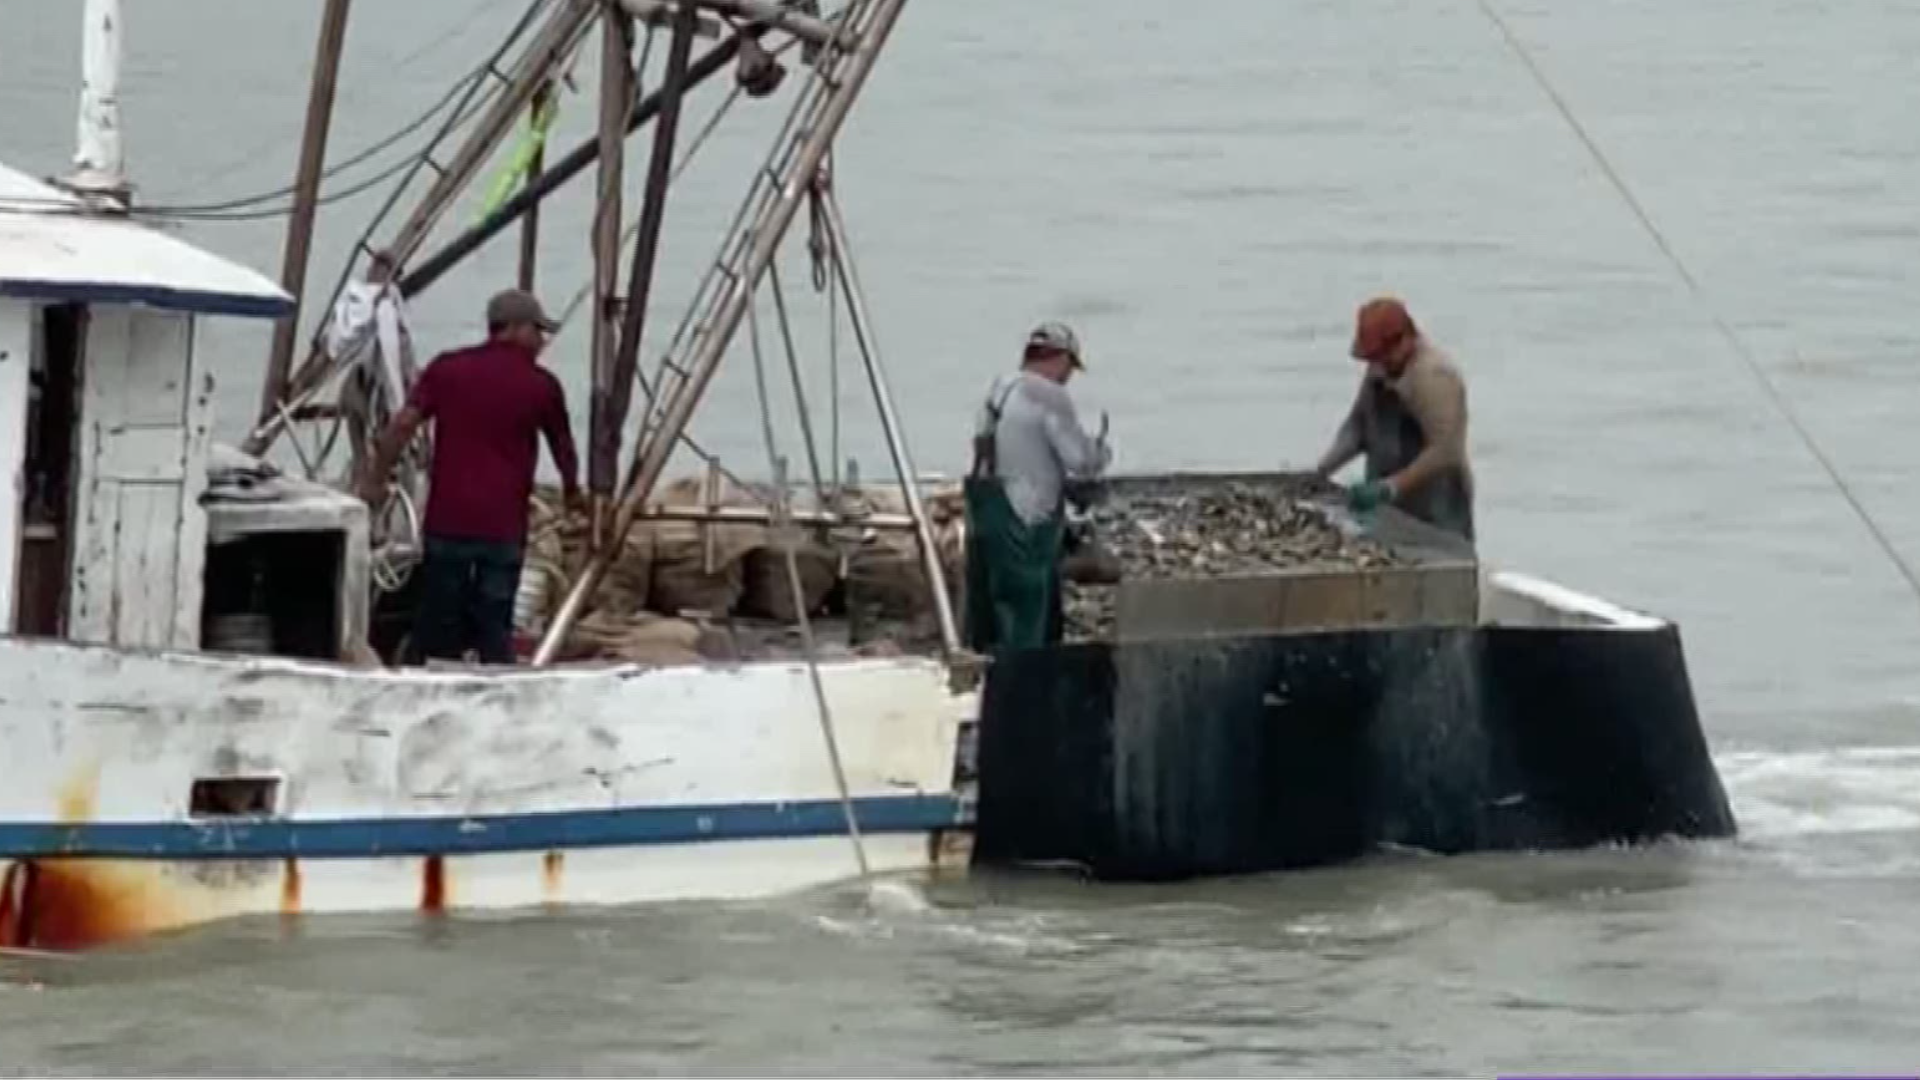 Oyster farming will be legal as of Sept. 1 after Governor Greg Abbot signed a bill.